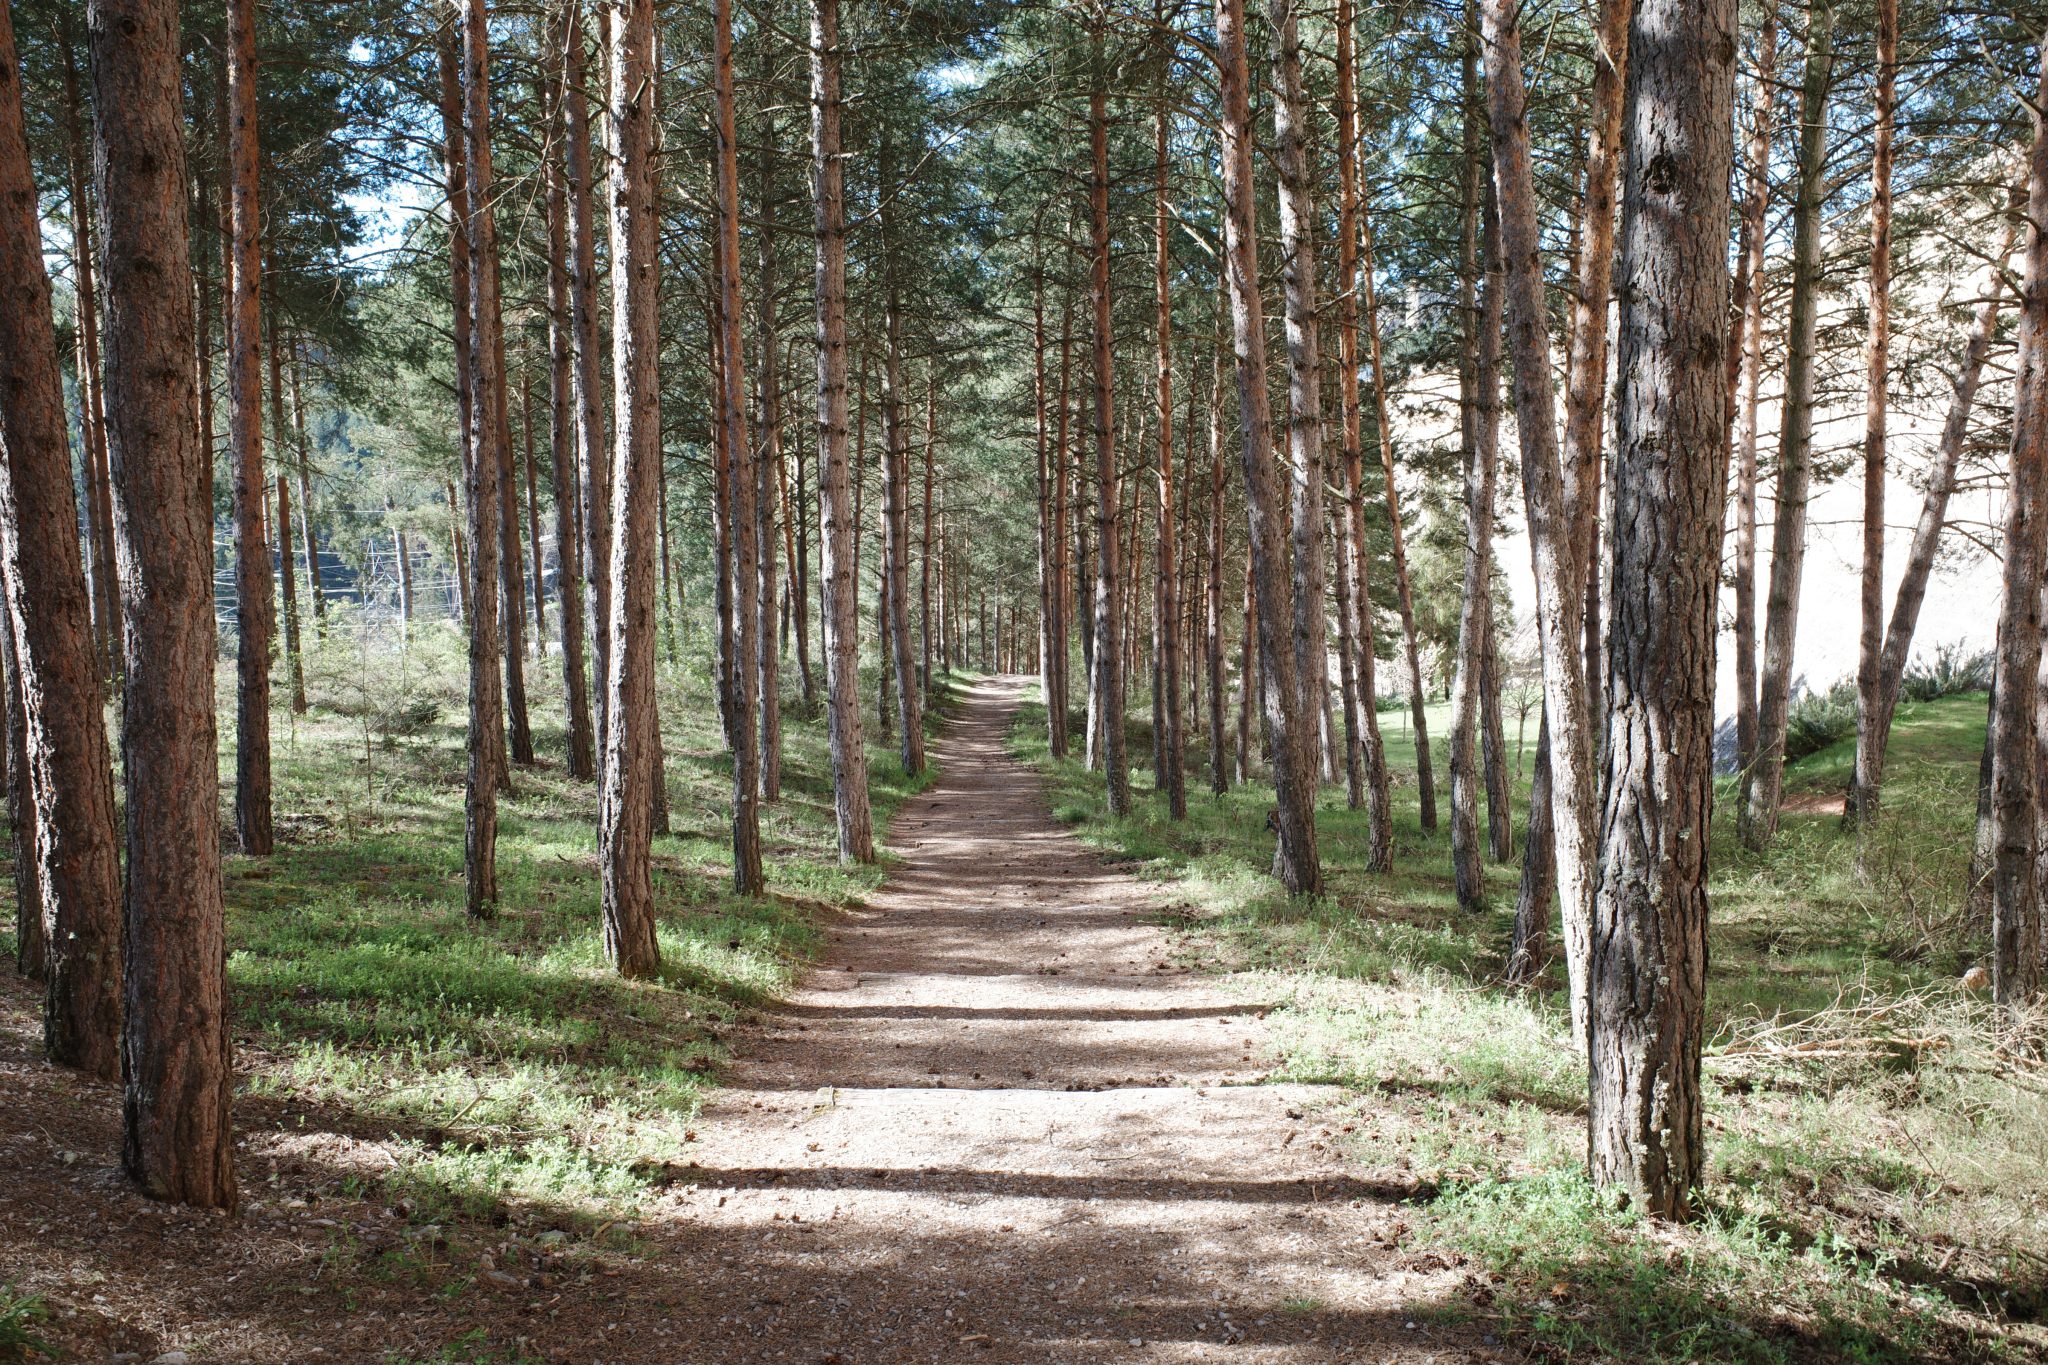 Hikking path in a pine forest in northern Spain.